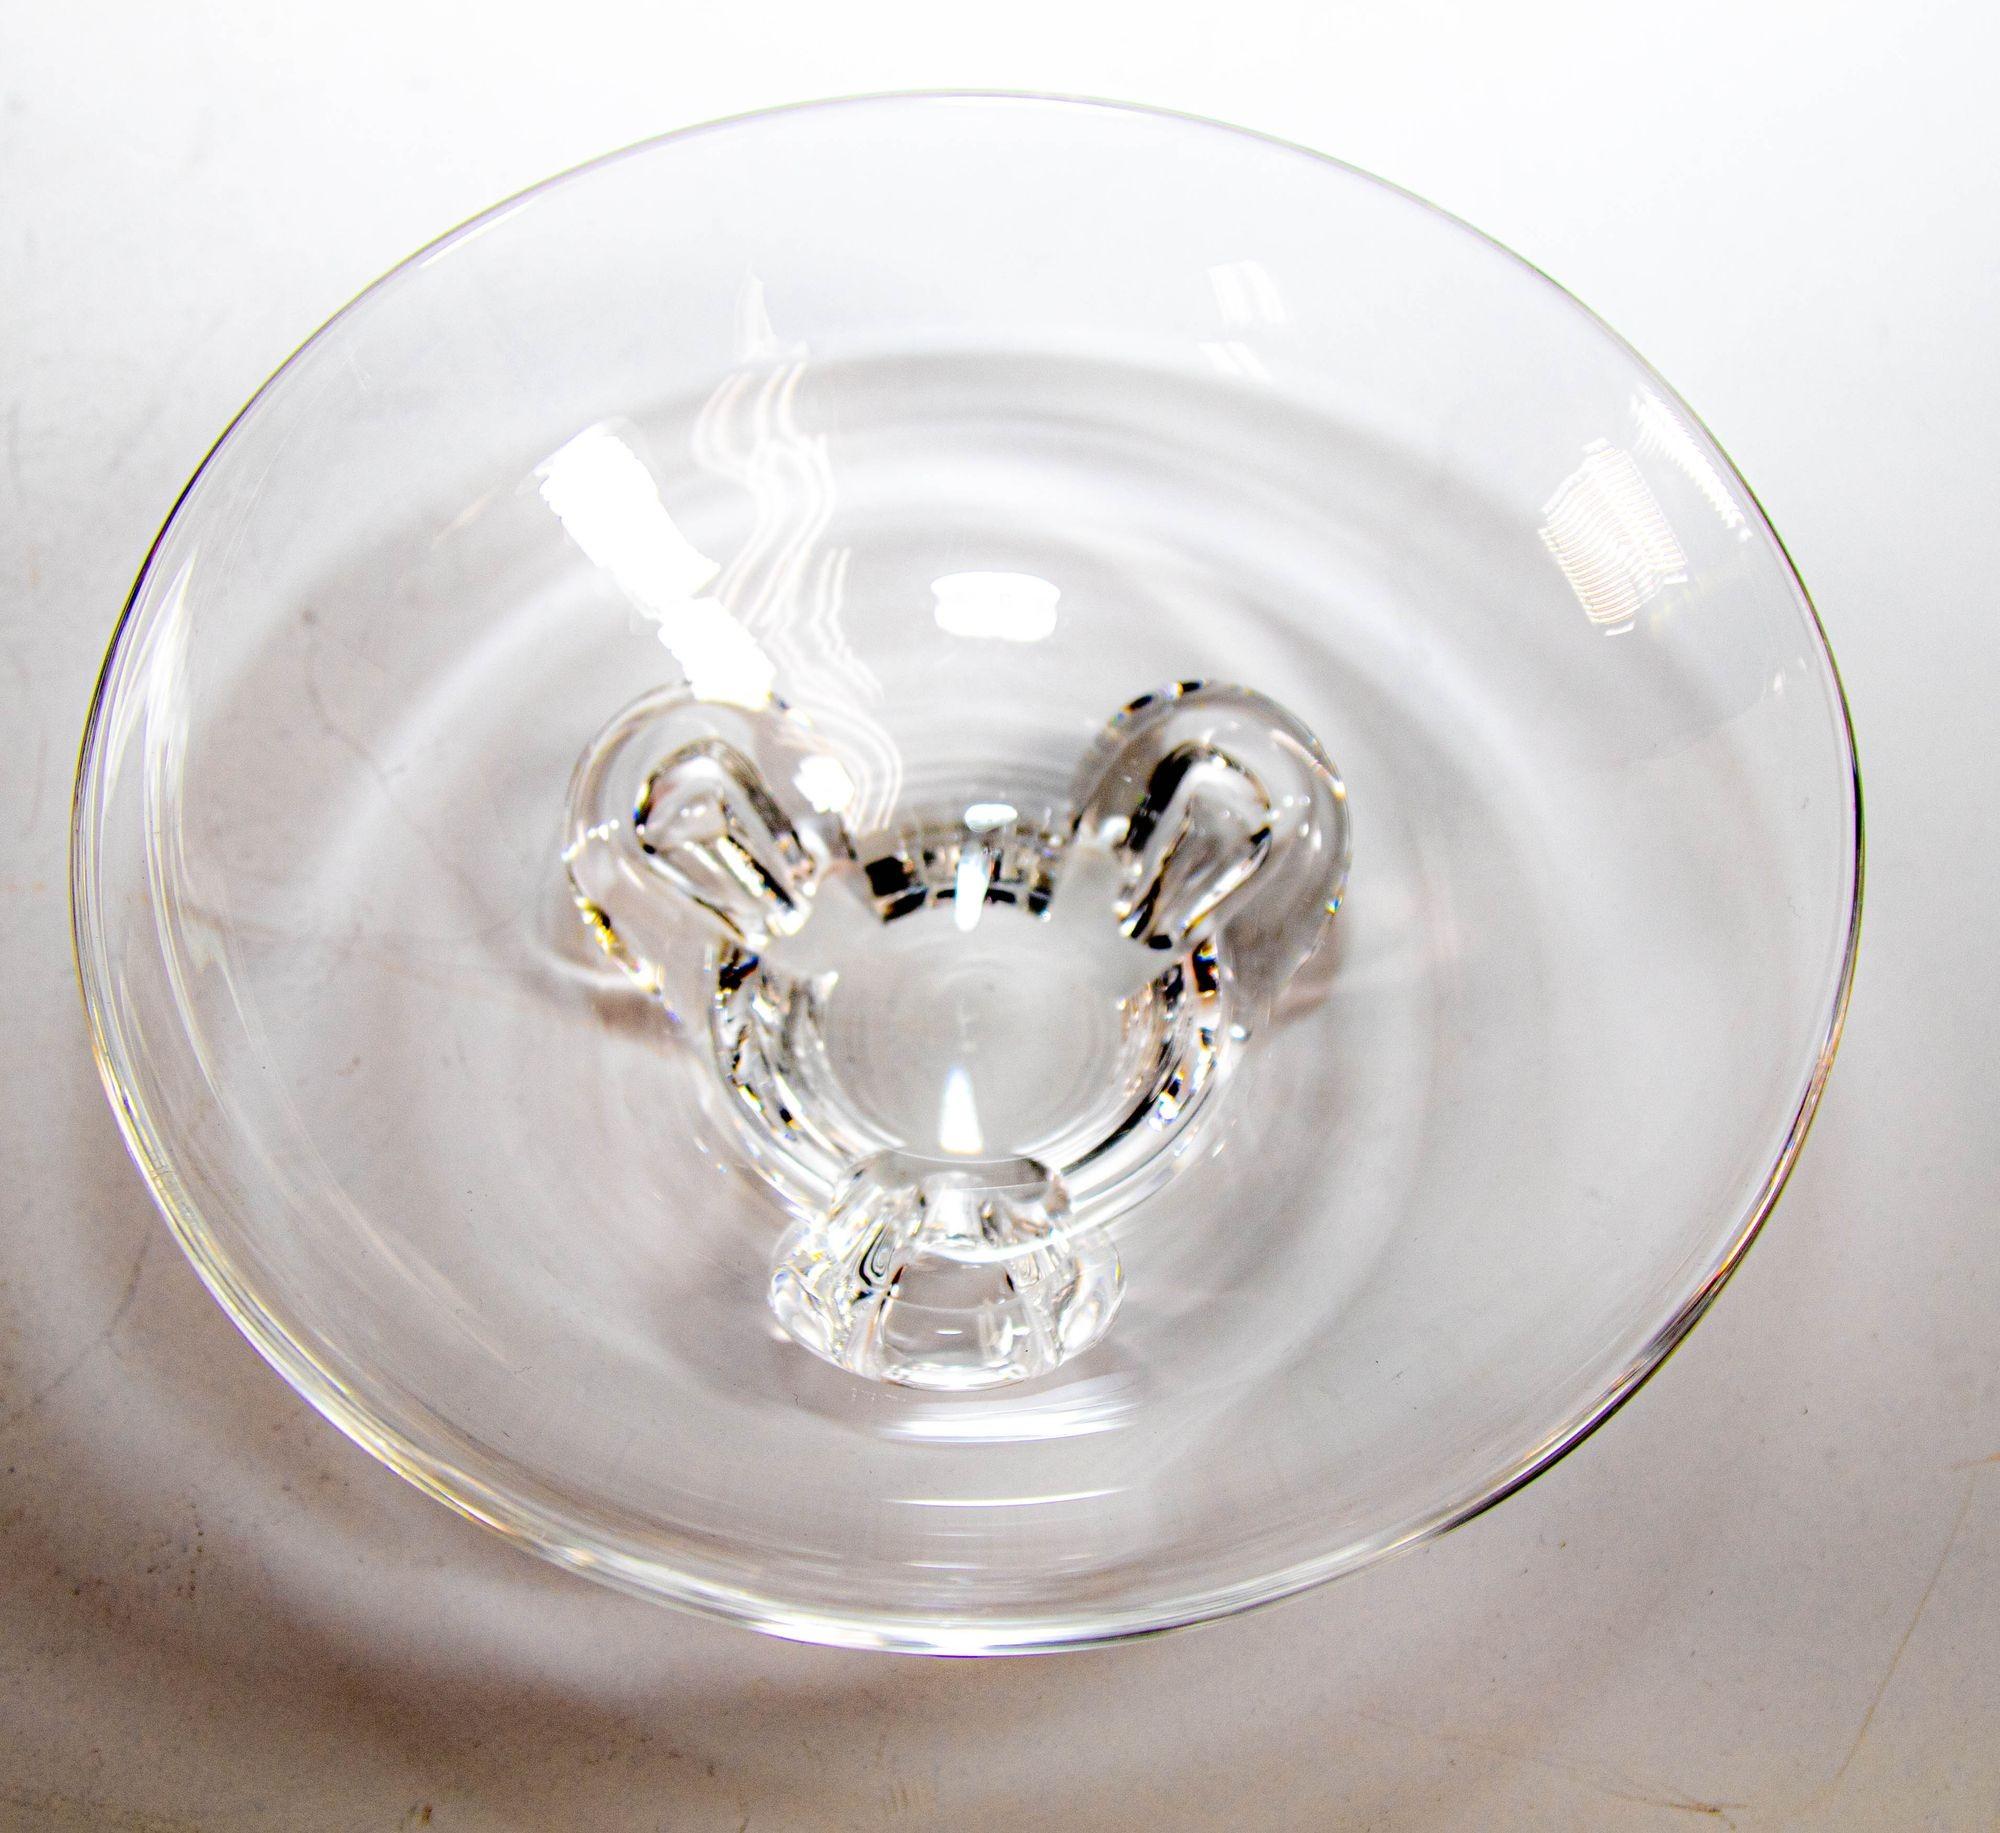 Vintage Crystal Clear Art Glass Steuben Bowl Dish.
Vintage Modern Clear Crystal Art Glass Floret Footed Bowl Signed Acid Etched Steuben.
Designed by Steuben in the late 20th century this bowl is a timeless Steuben design perfect for any